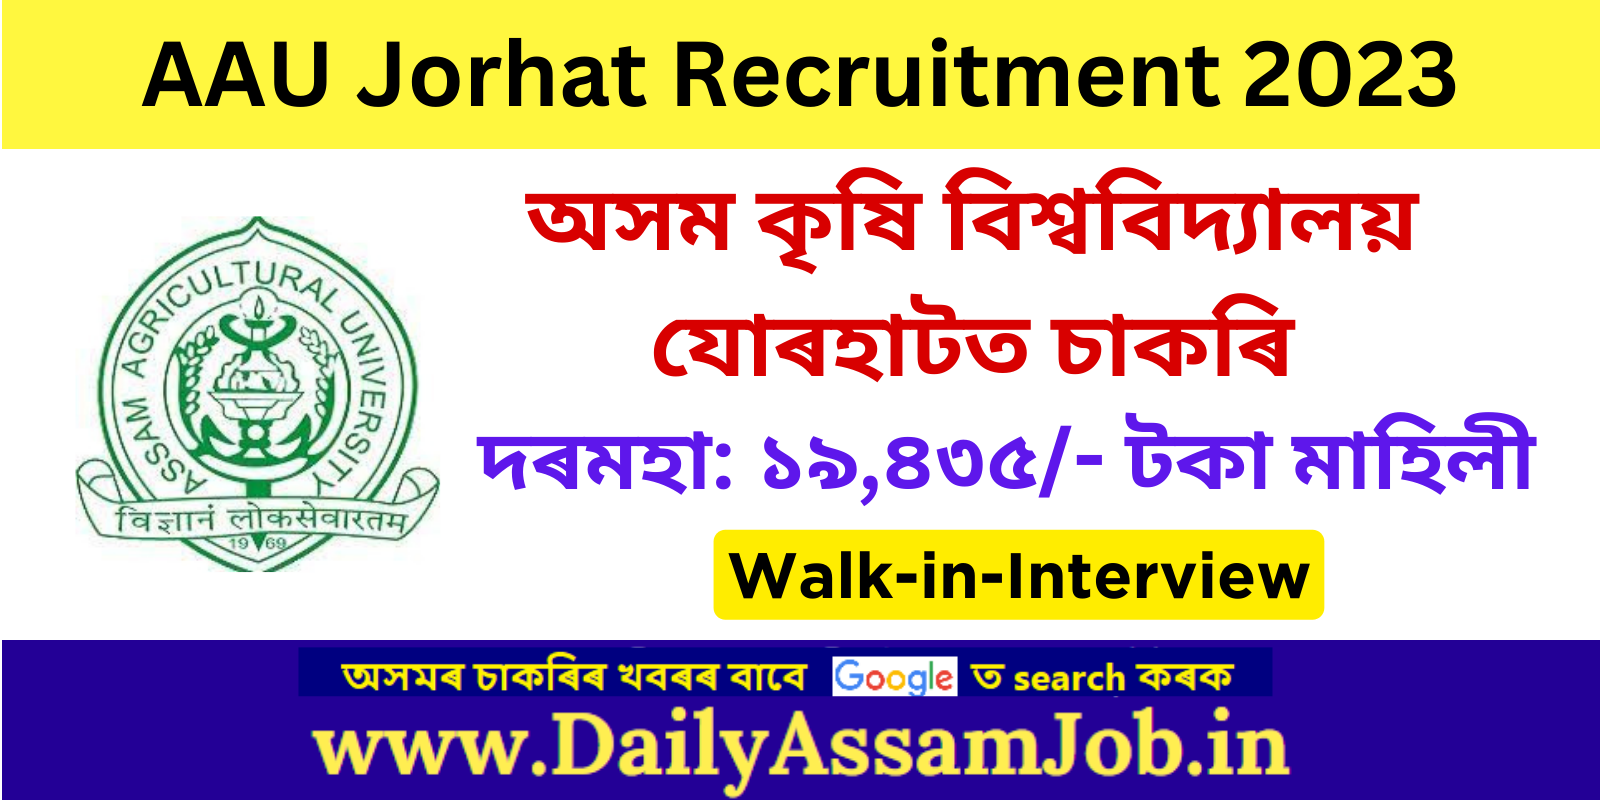 Assam Career :: AAU Jorhat Recruitment 2023 for Highly Skilled Worker Vacancy